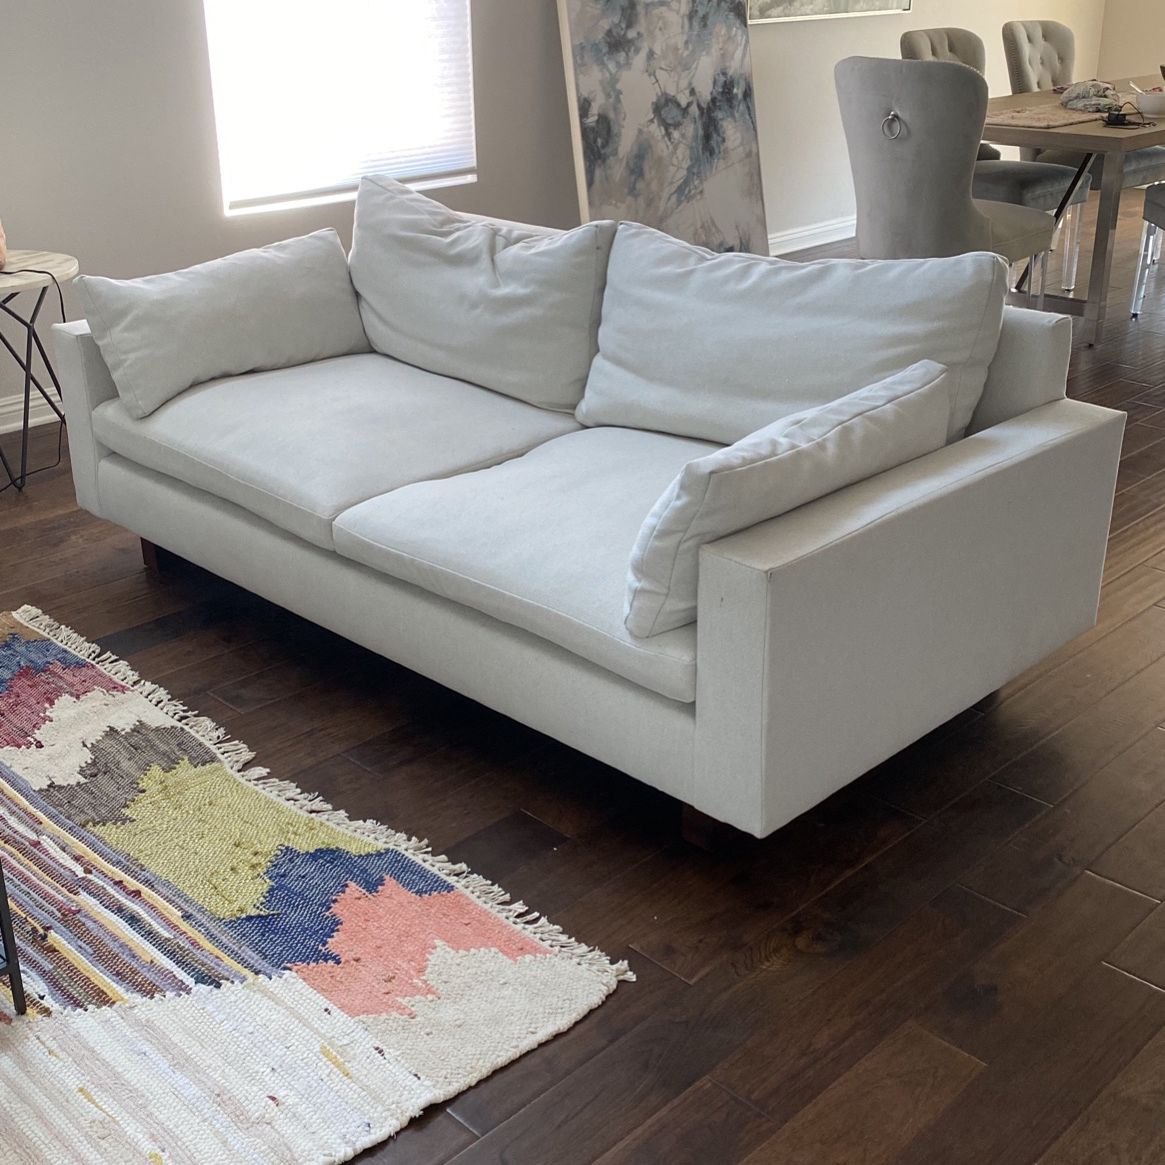 West Elm Harmony Sofa For In Agoura Hills Ca Offerup